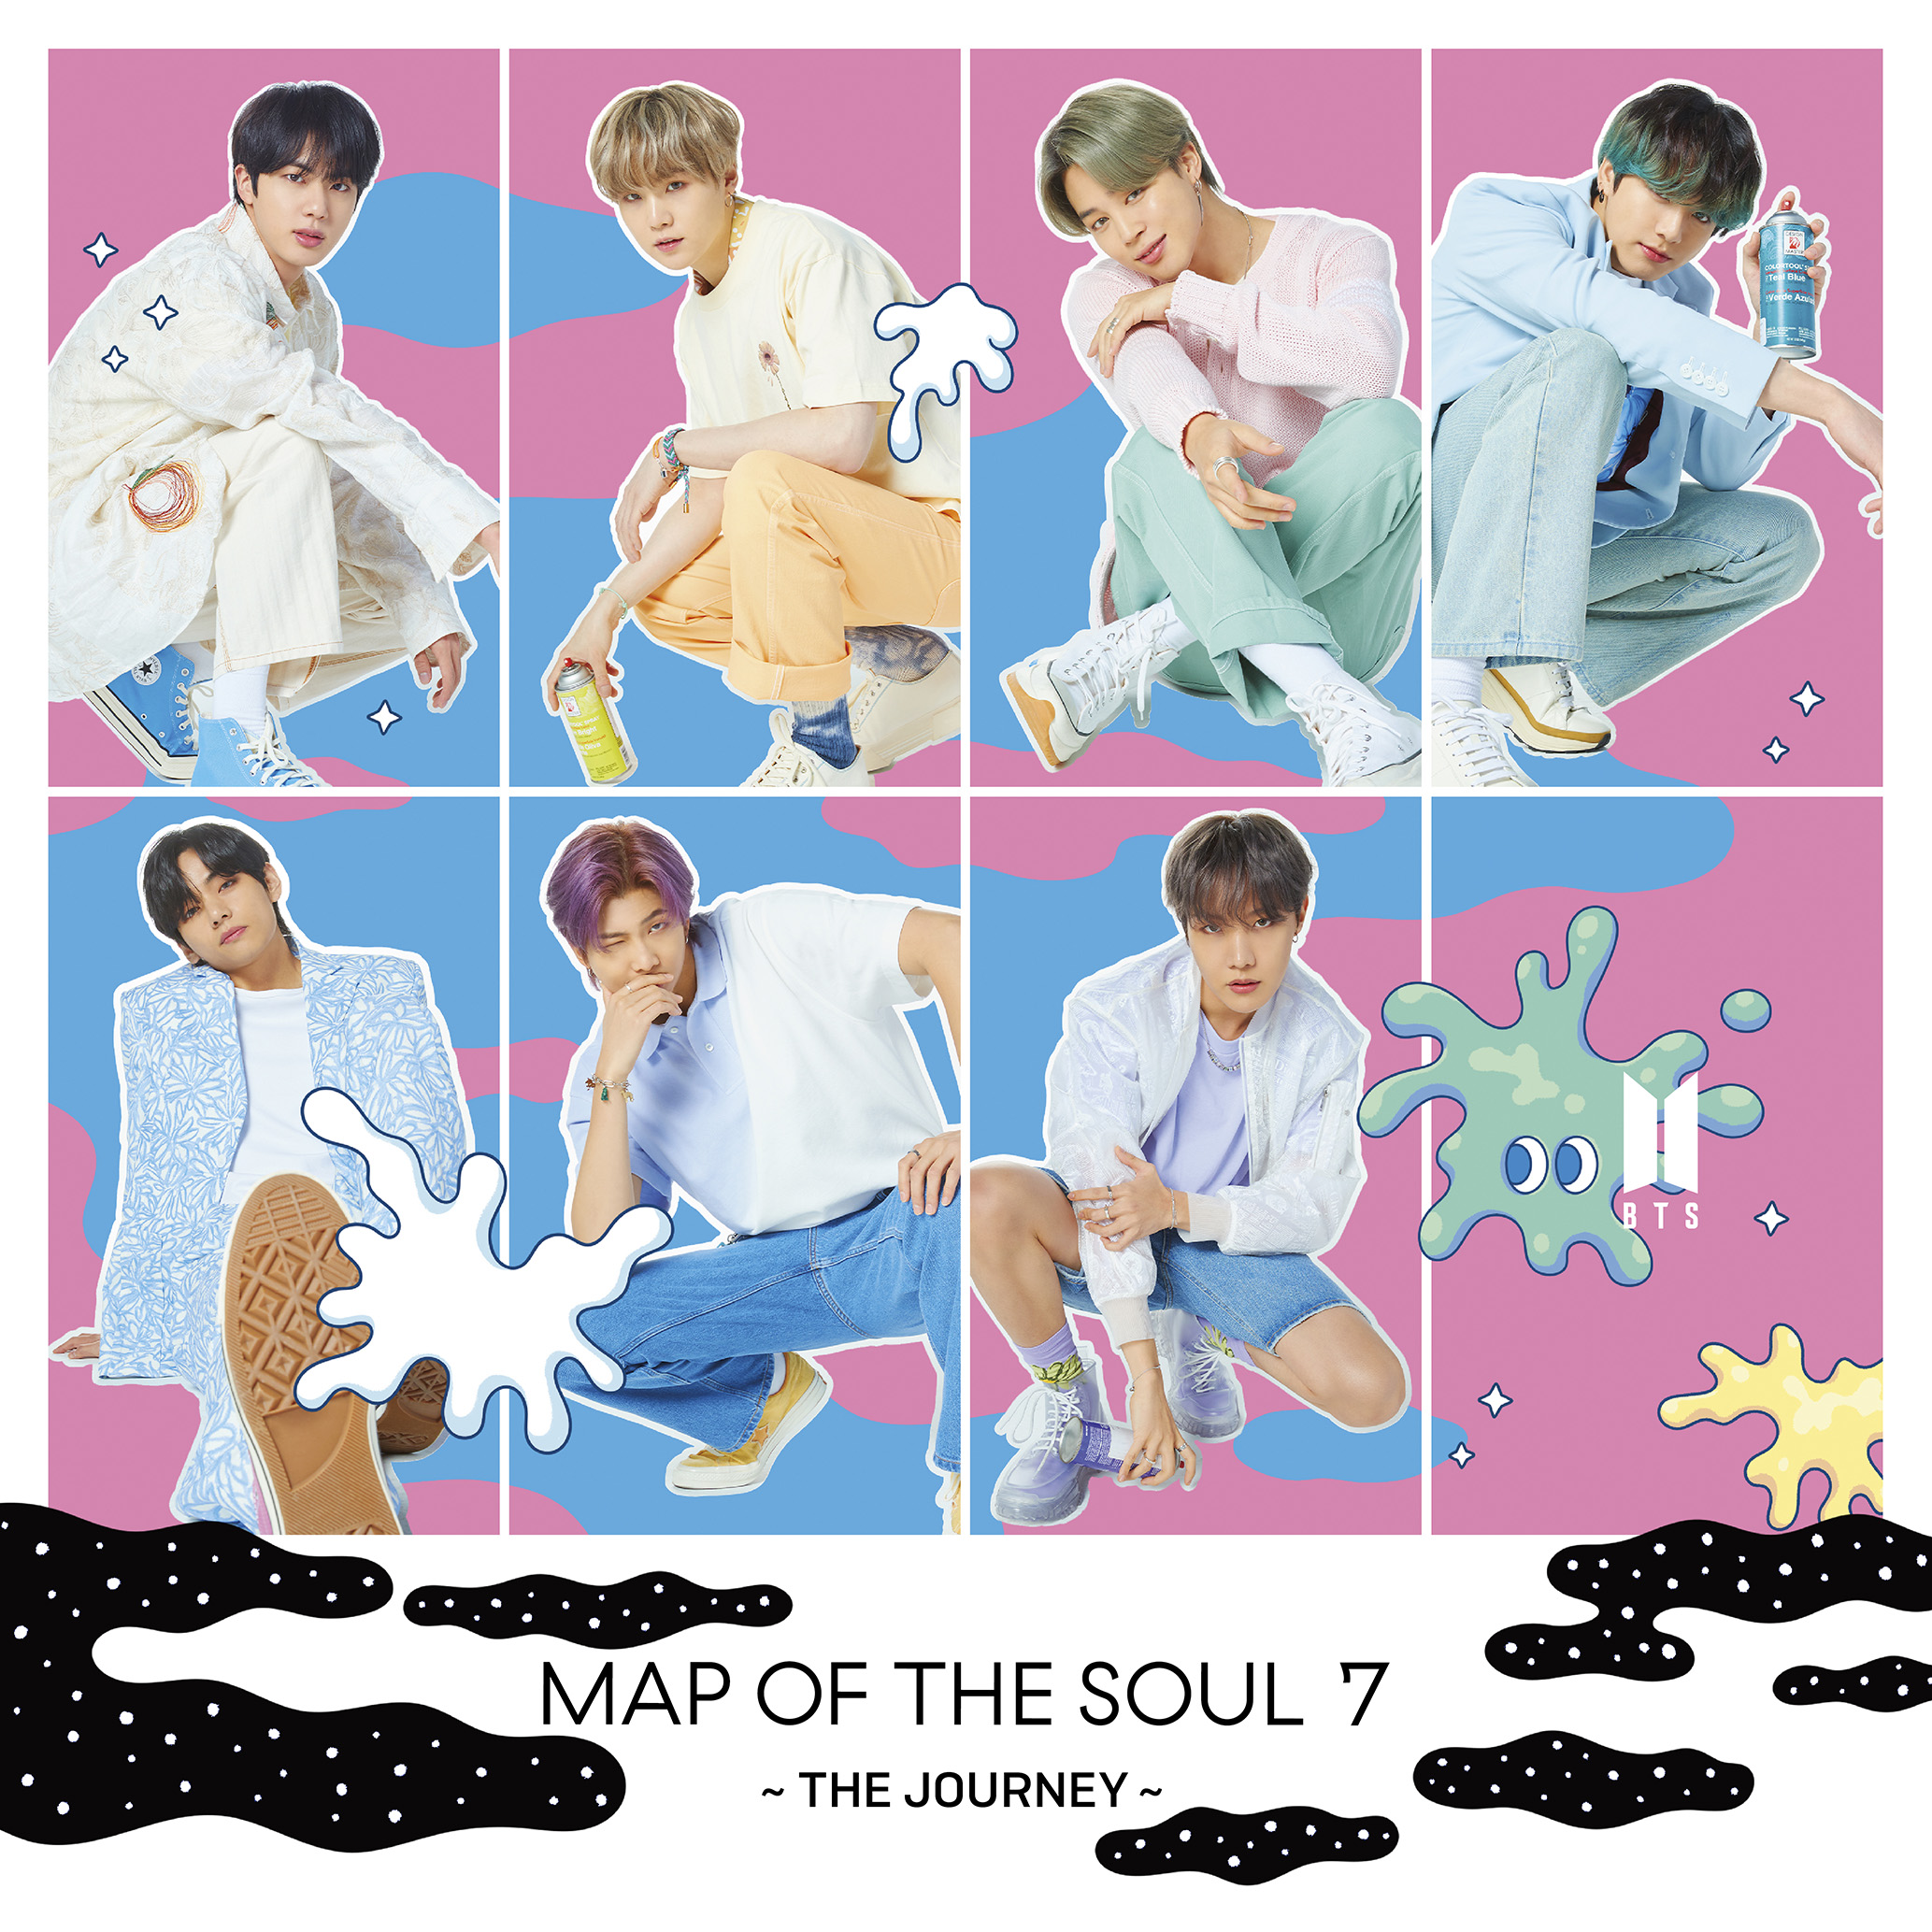 Map of the Soul: 7 ~The Journey~ | BTS Wiki | Fandom